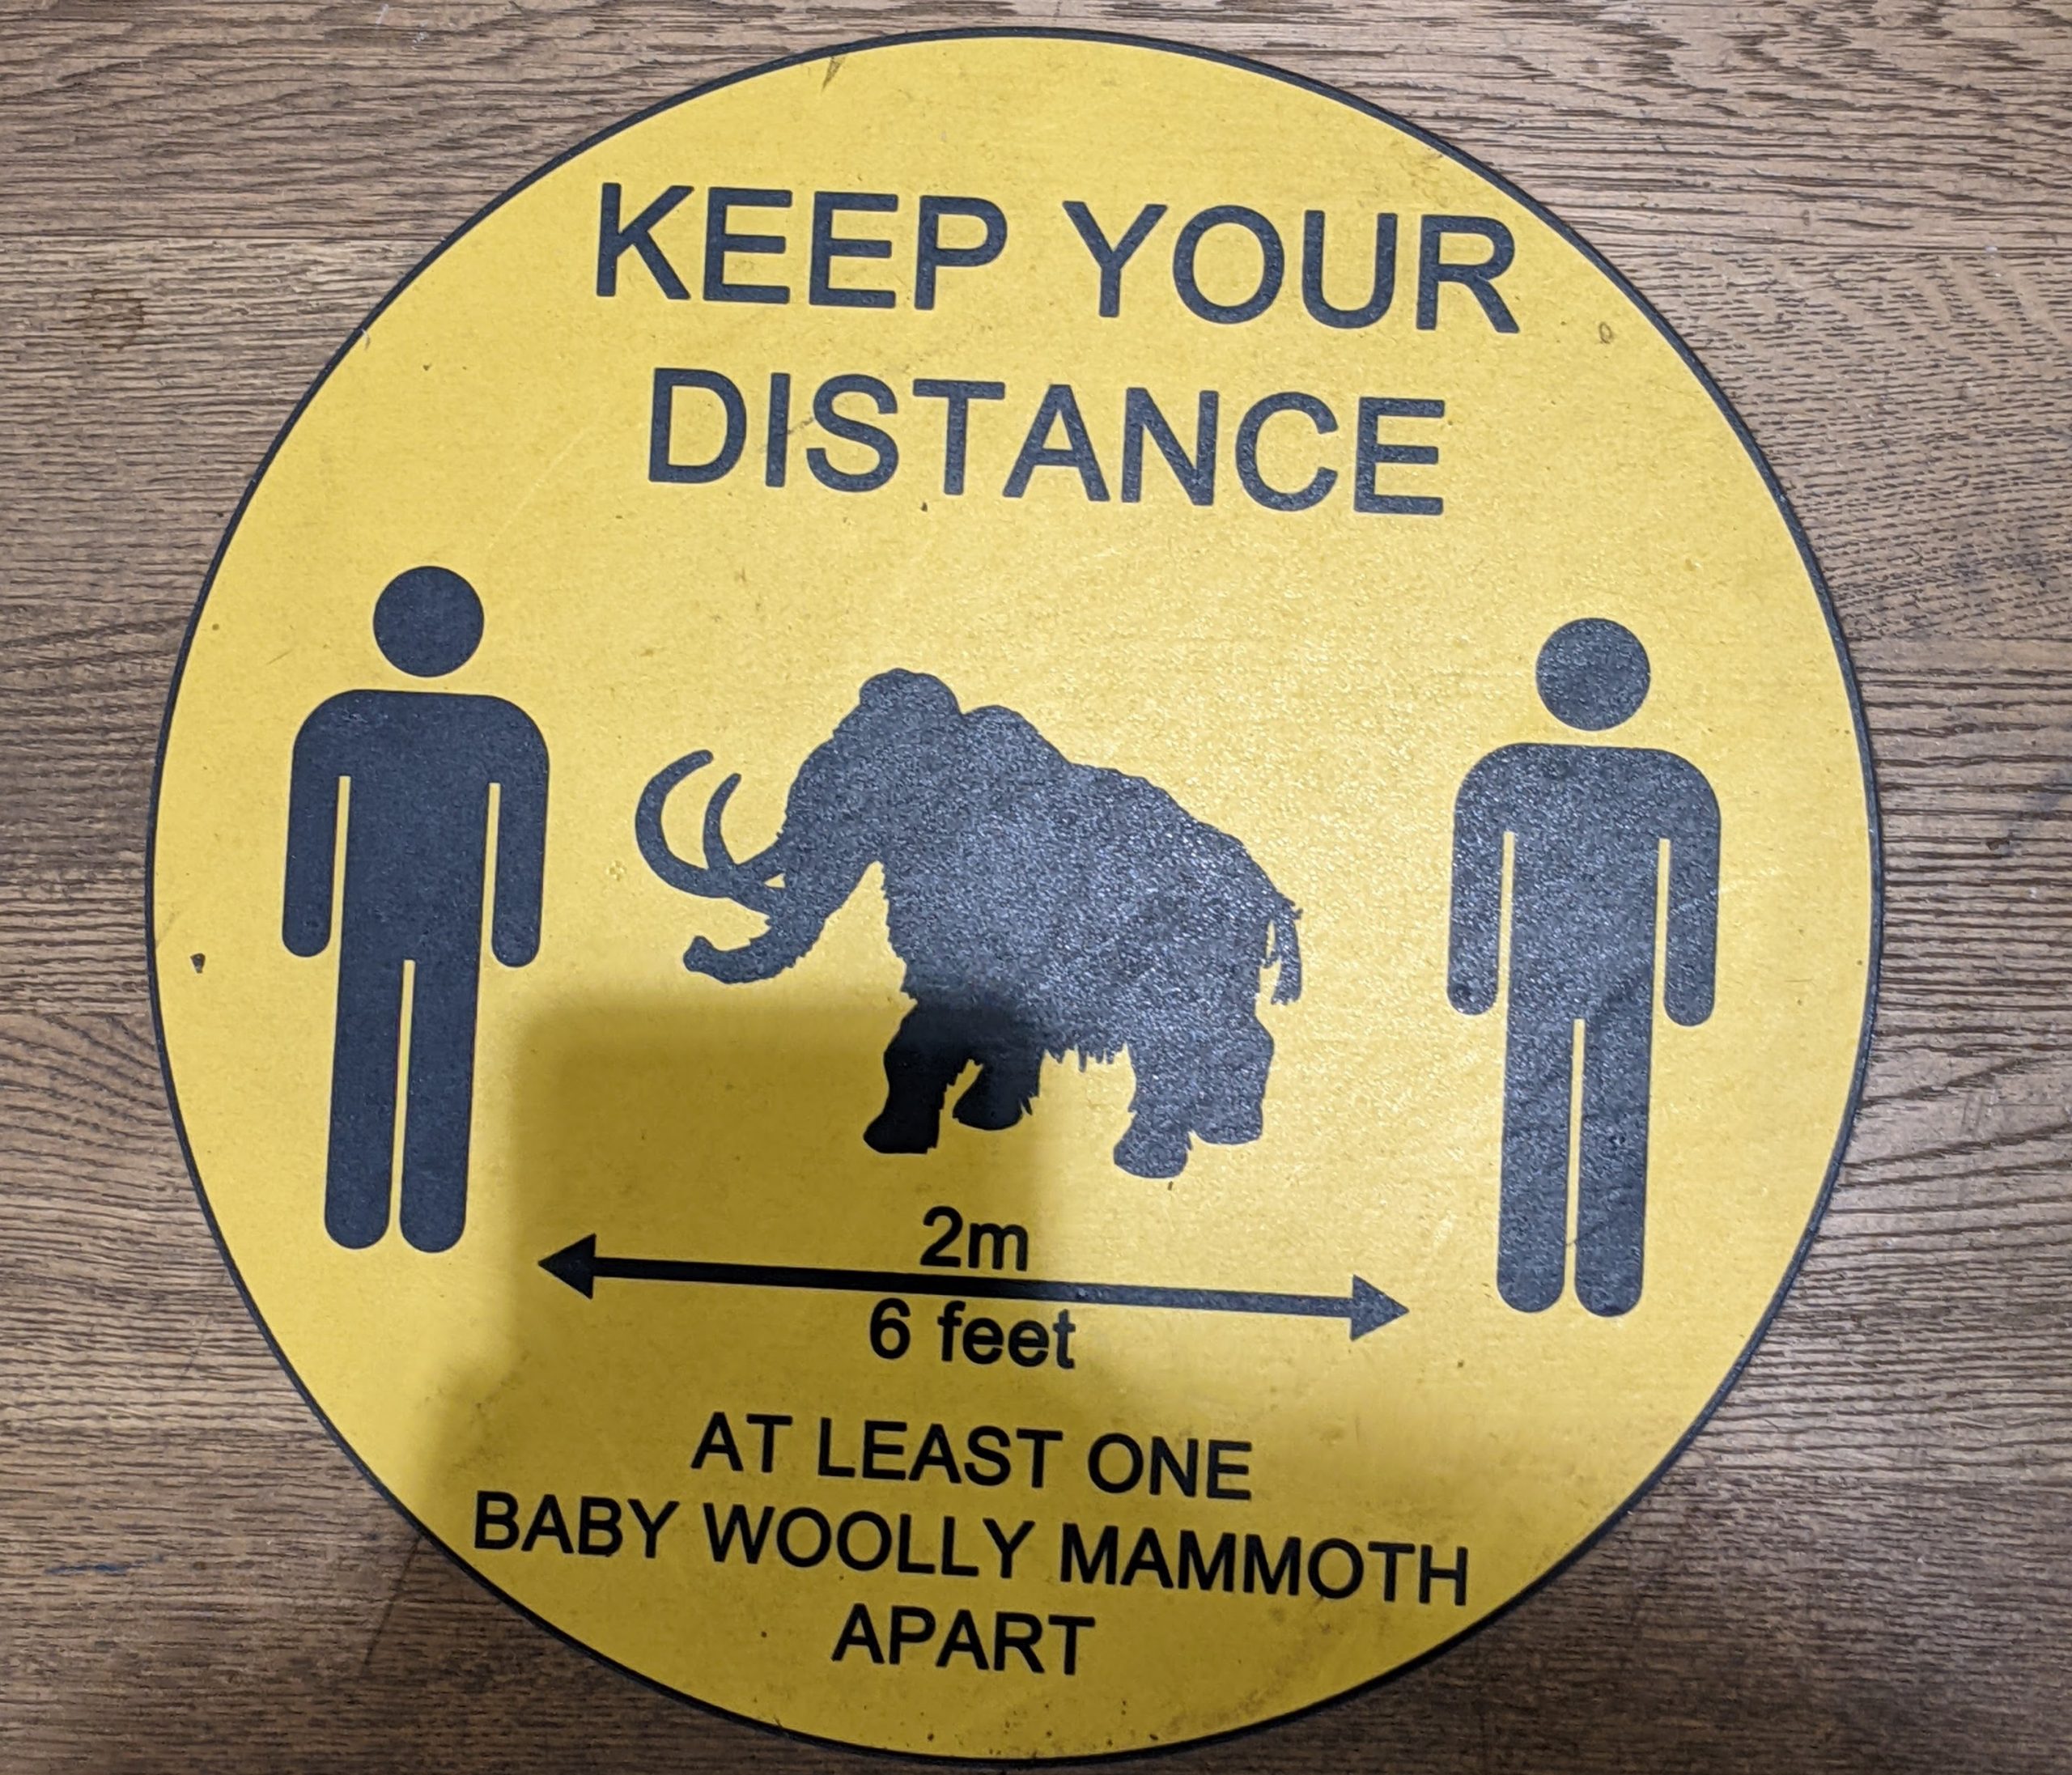 Social distancing: a baby mammoth apart